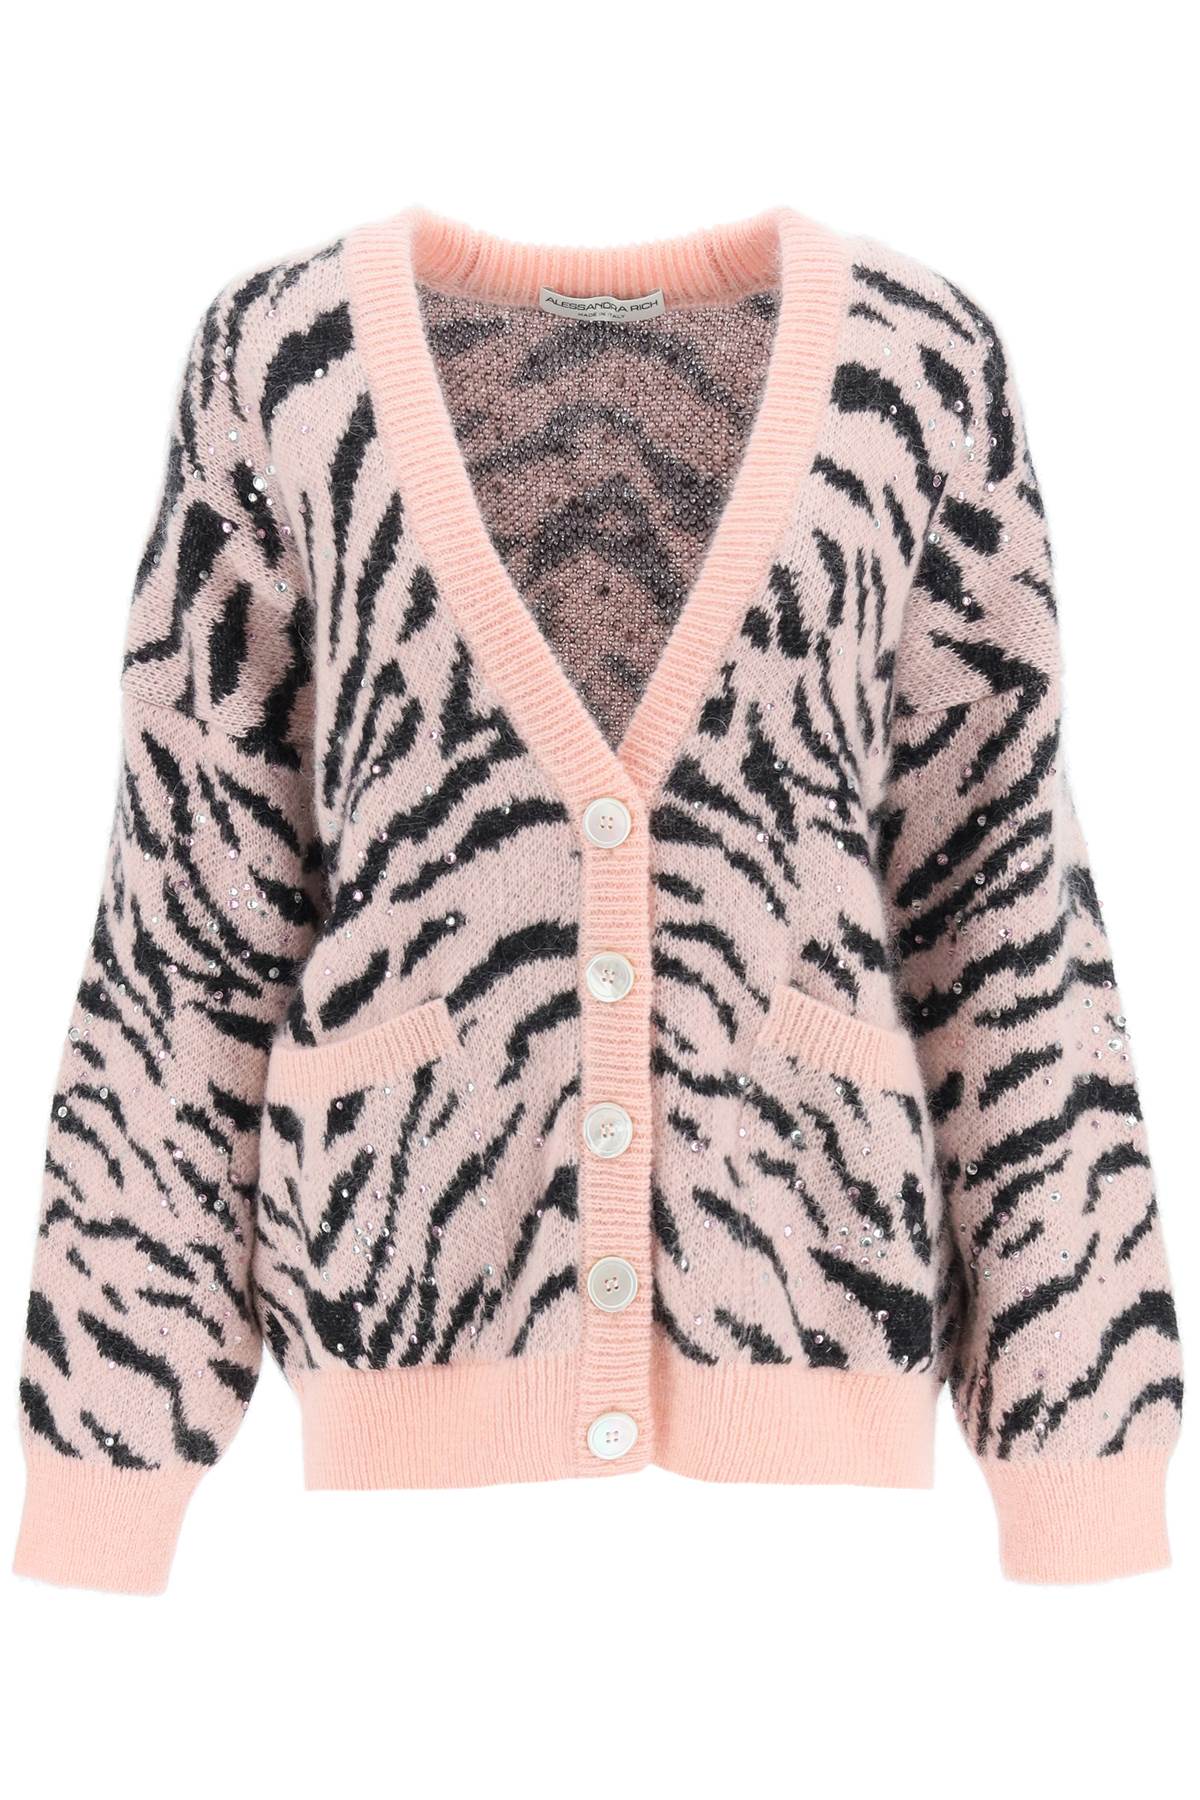 ALESSANDRA RICH OVERSIZED CARDIGAN WITH ZEBRA MOTIF AND CRYSTALS